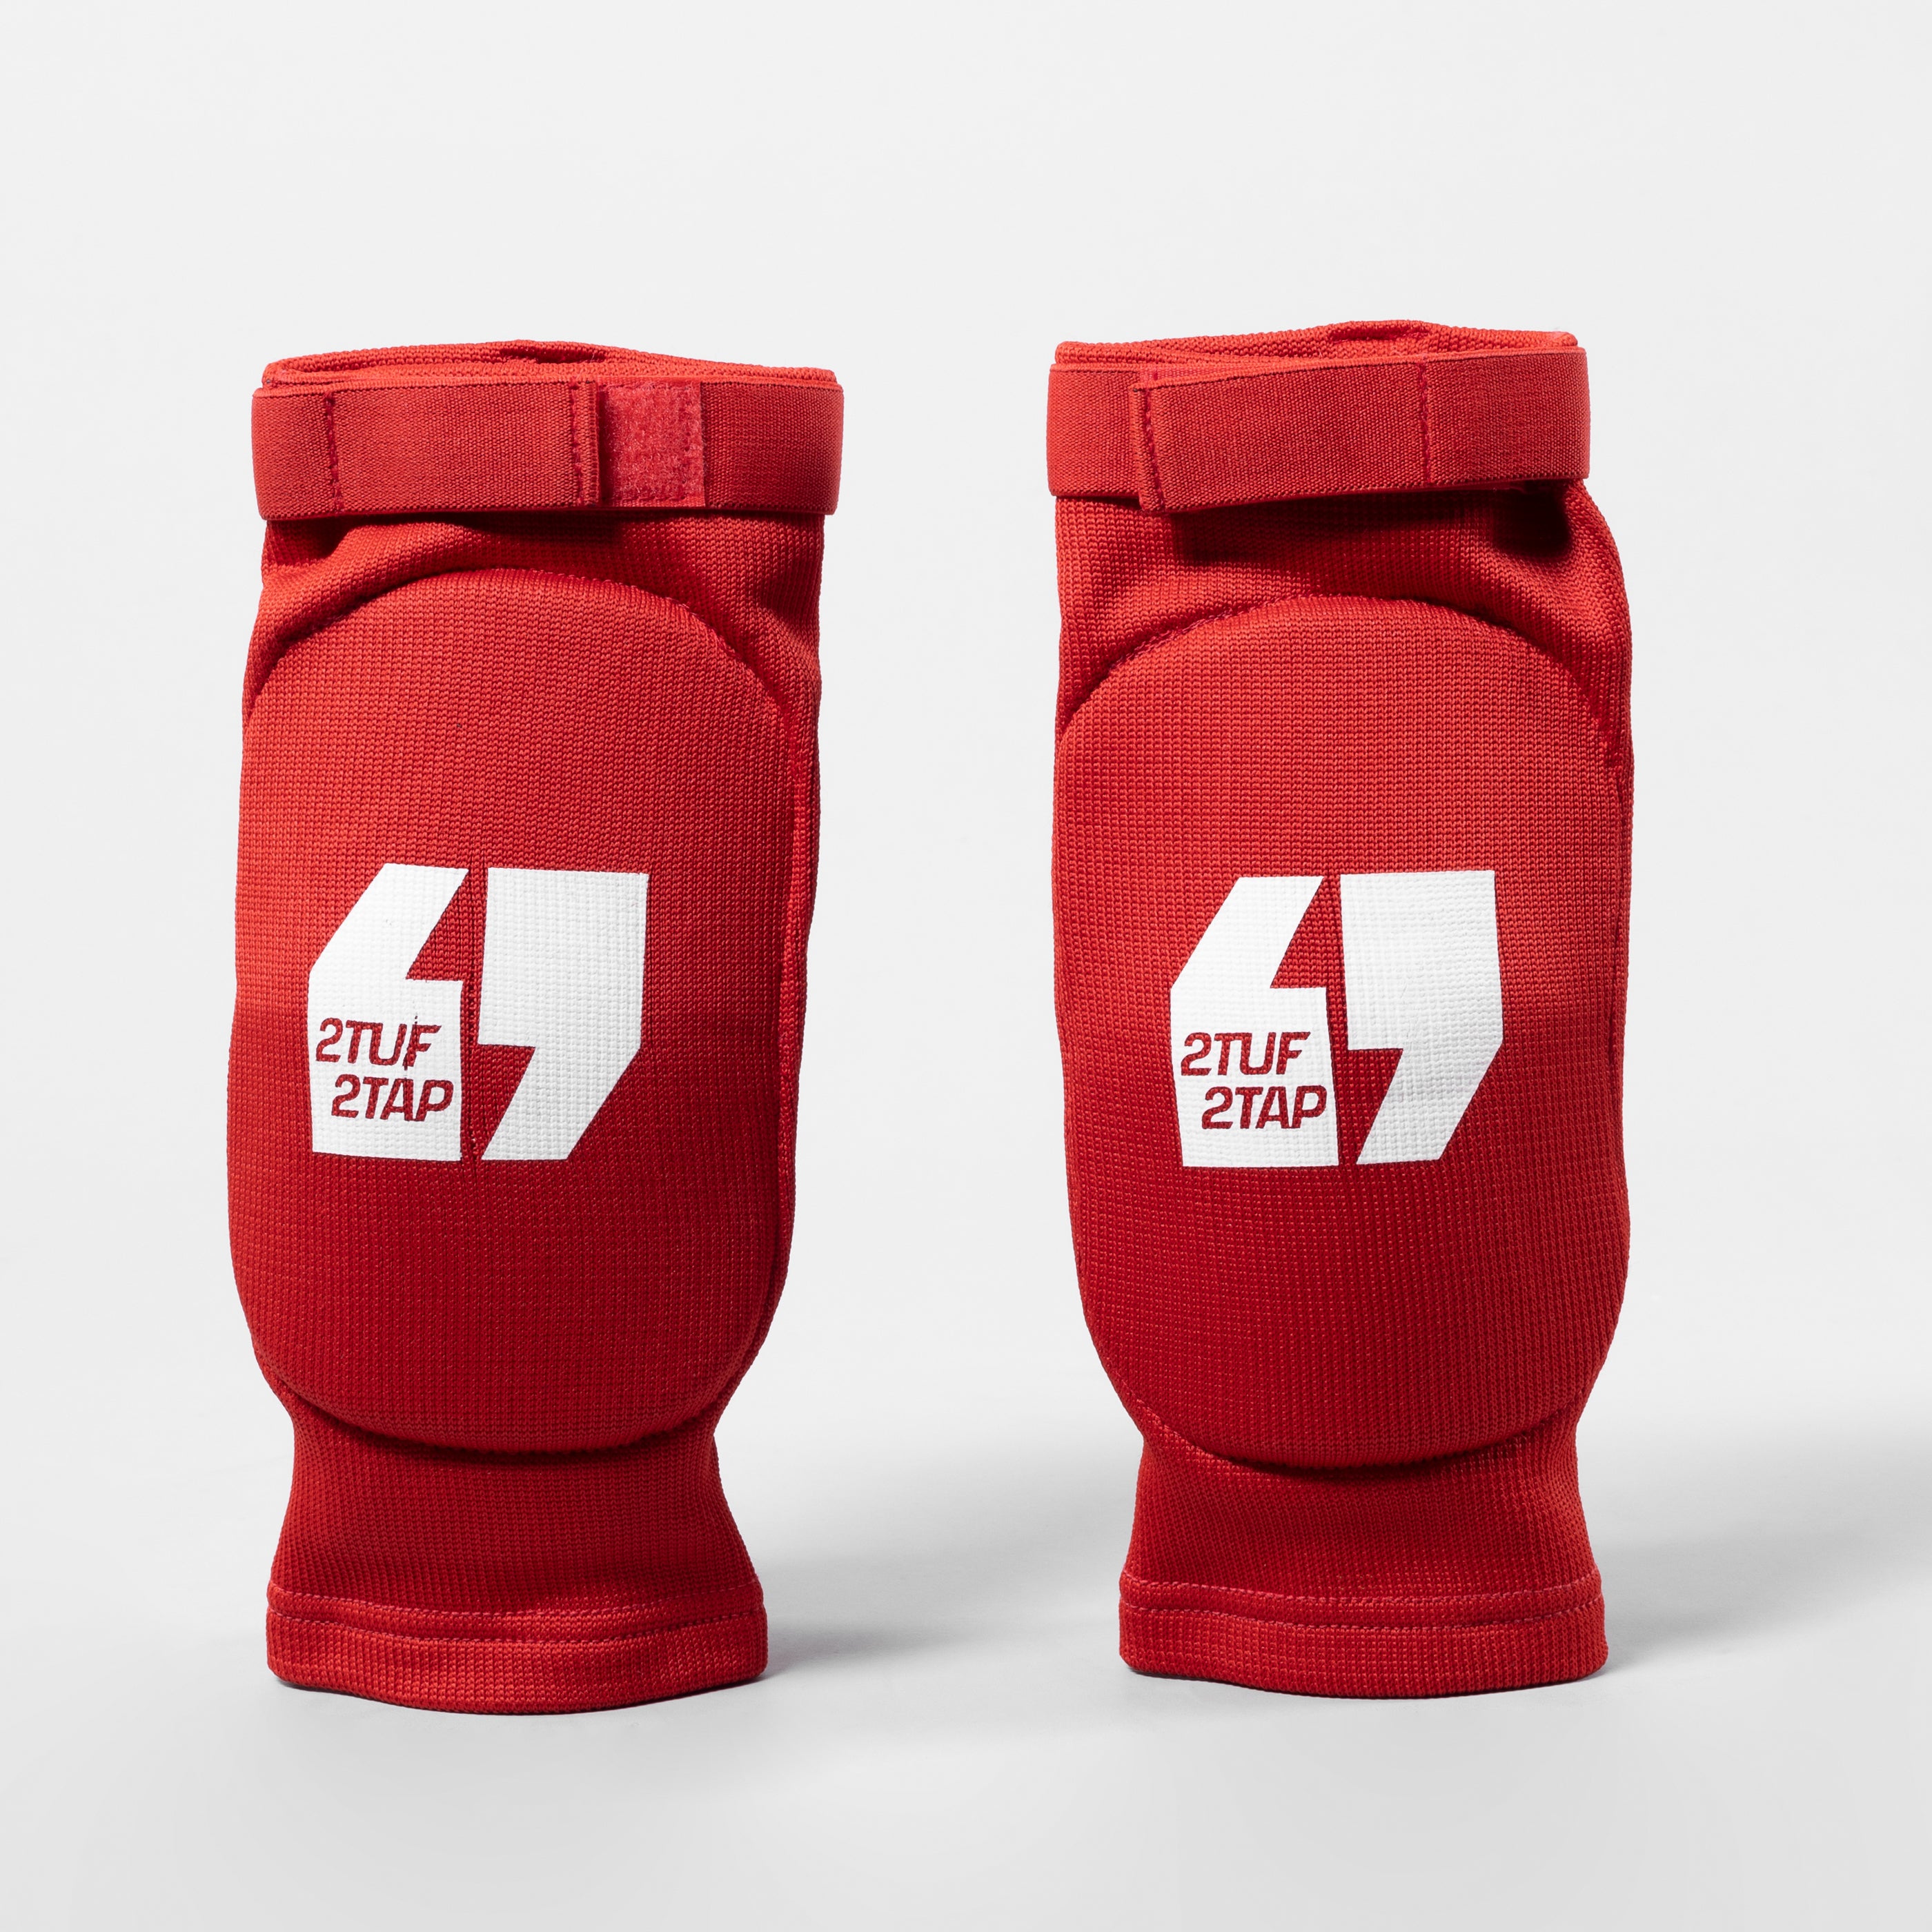 'Pro-Fit' Elbow/Knee Supporting Pads - Red/White 2TUF2TAP